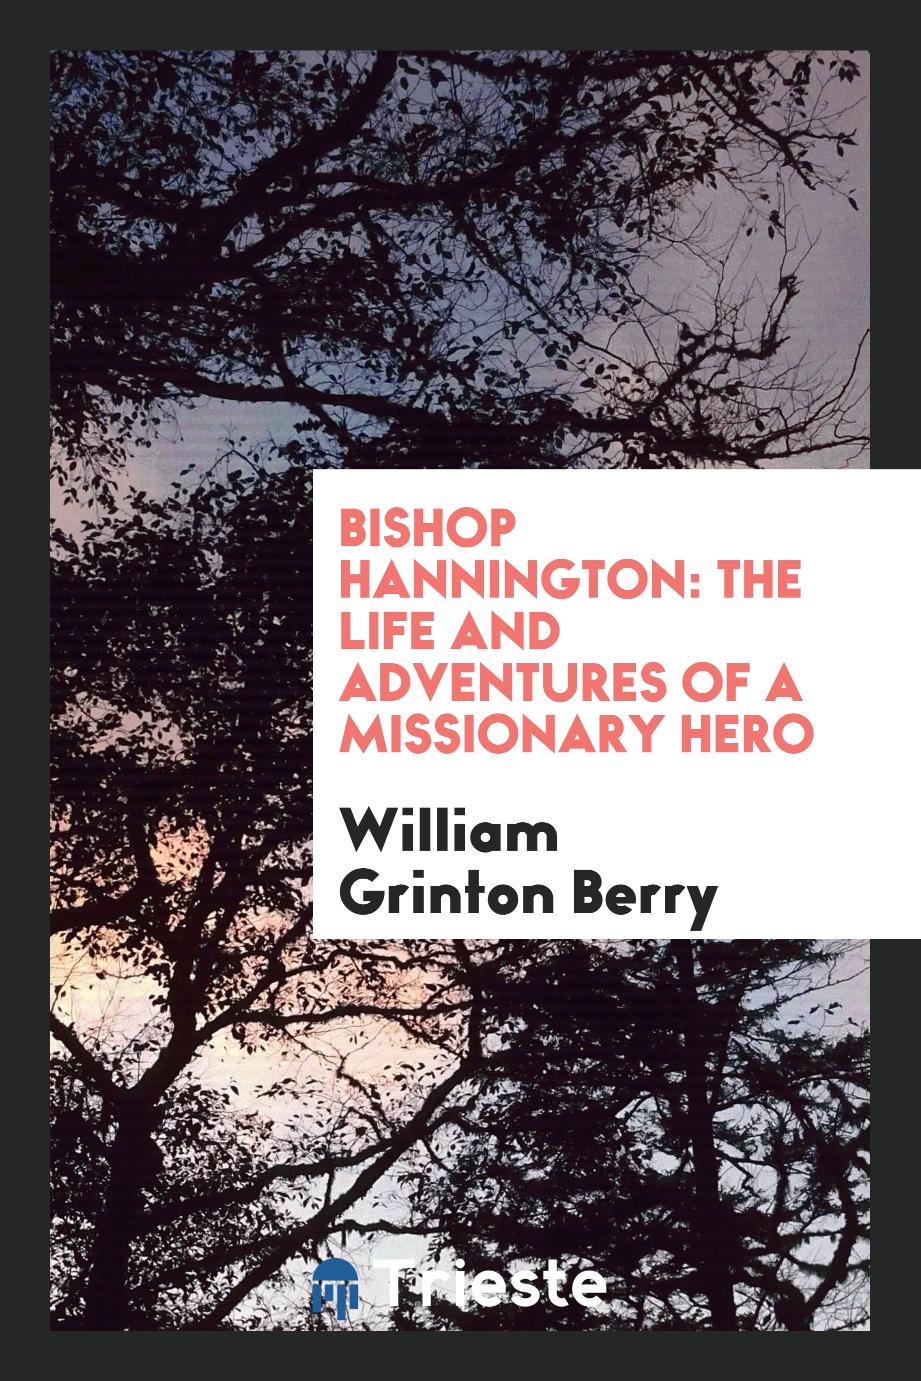 Bishop Hannington: the life and adventures of a missionary hero